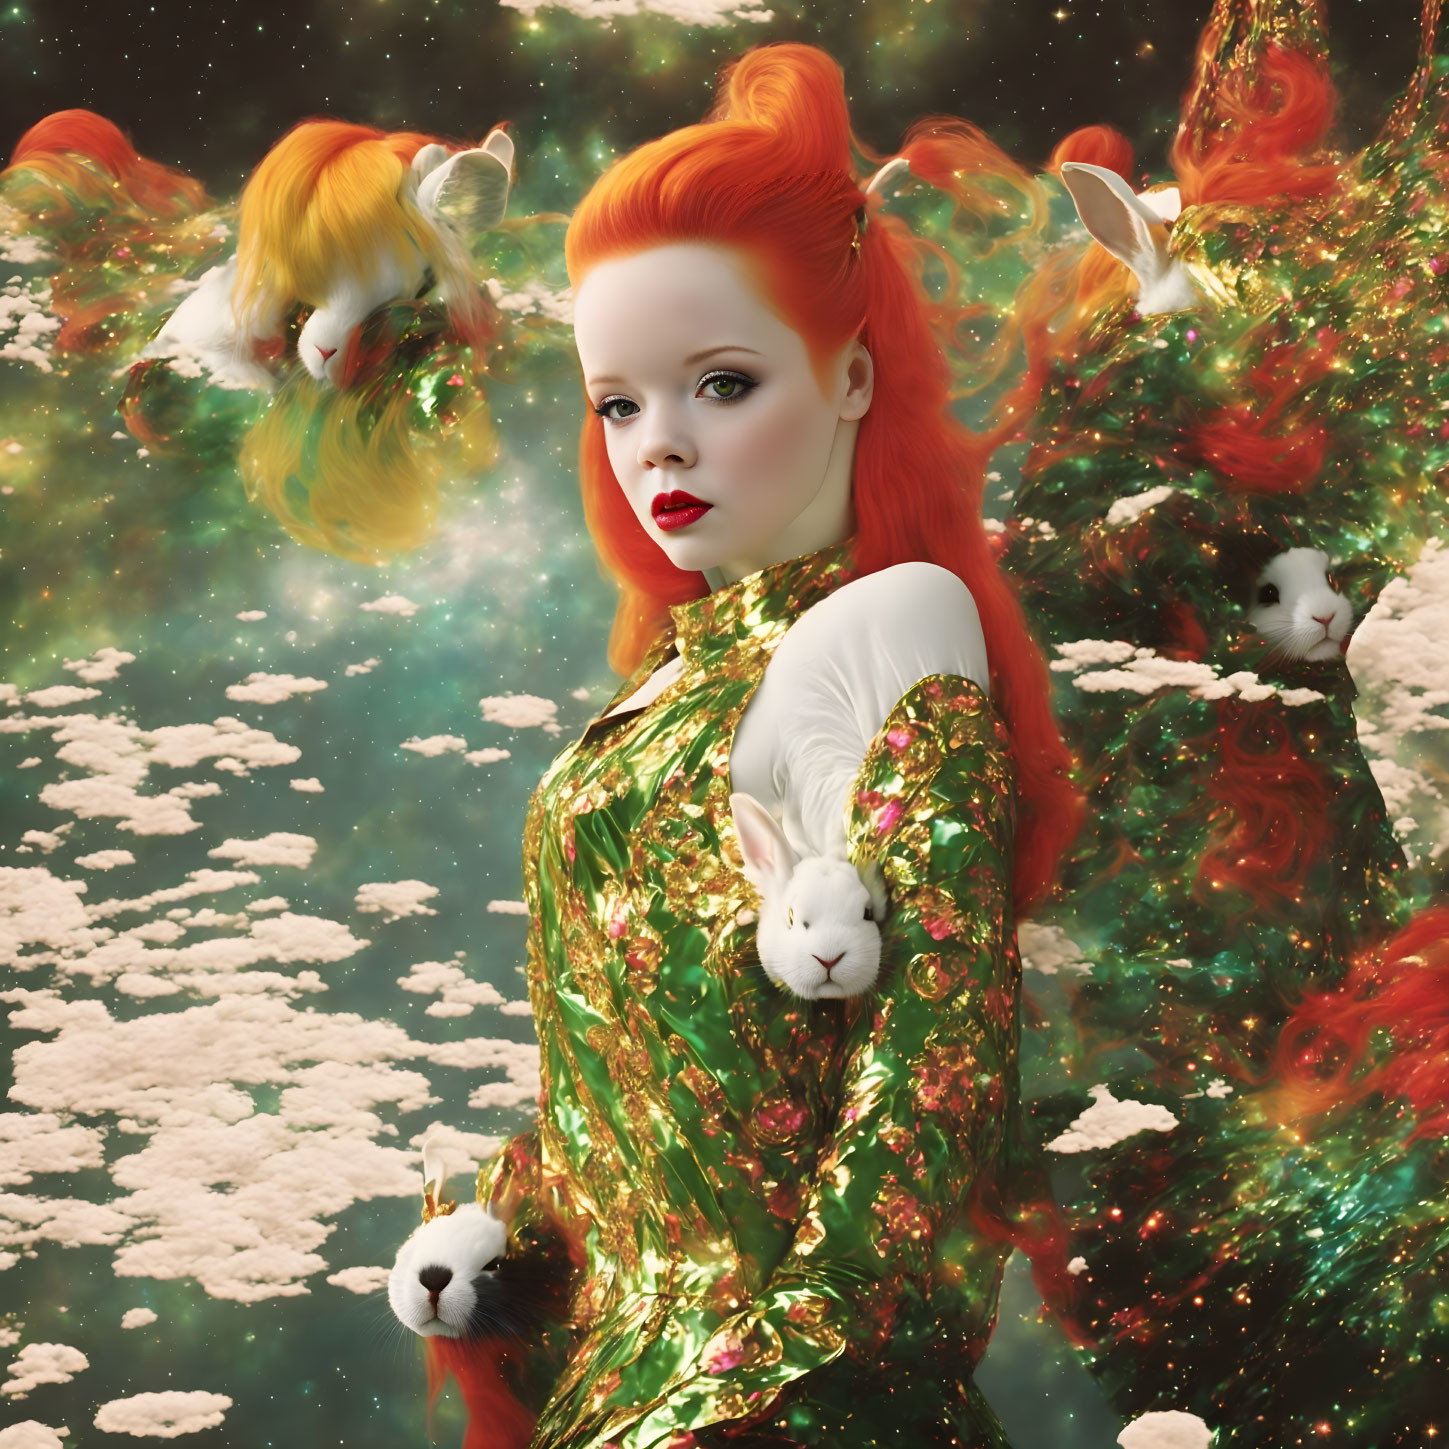 Striking Red-Haired Woman with Bold Makeup Surrounded by Surreal Elements